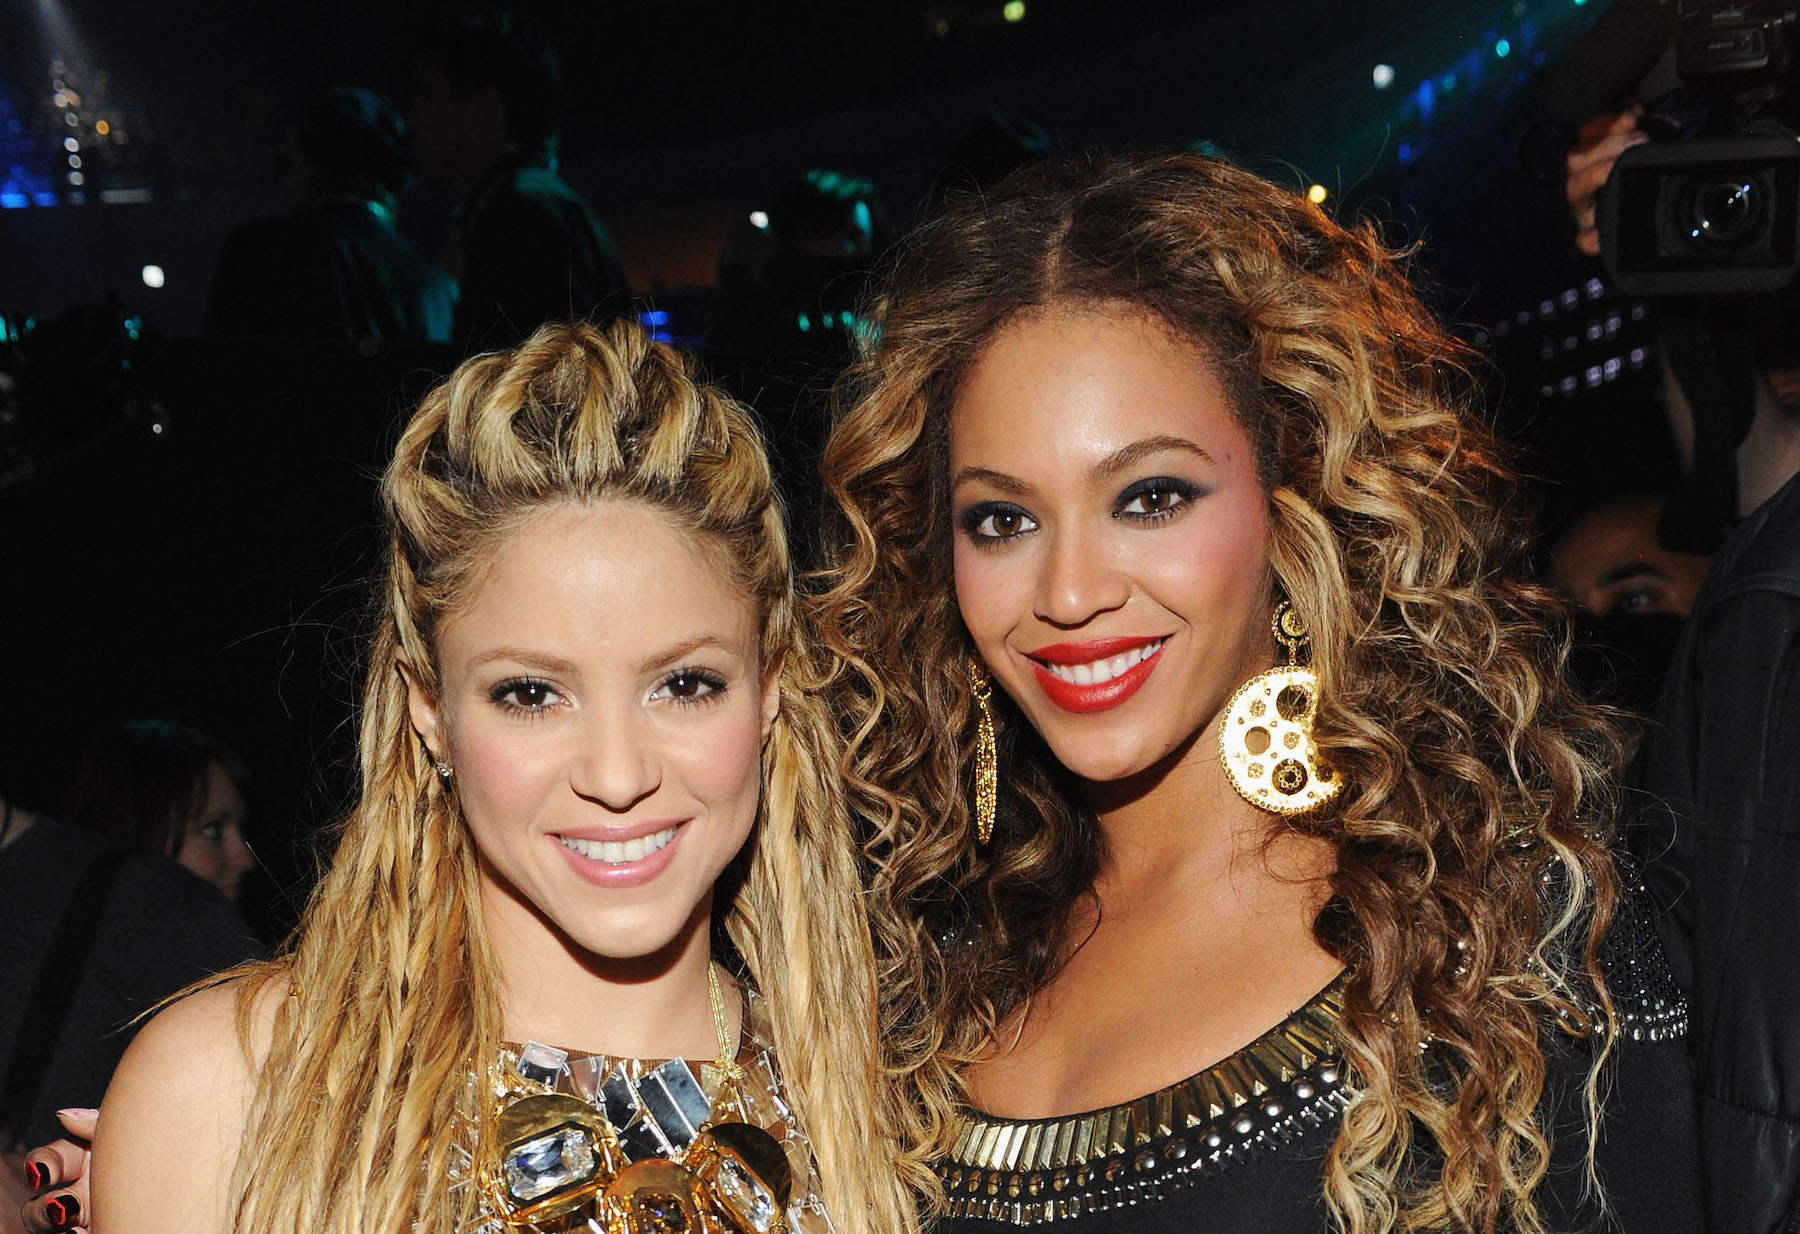 Shakira & Beyoncé, who once collaborated on the song 'Beautiful Liar', posing for a pH๏τo together